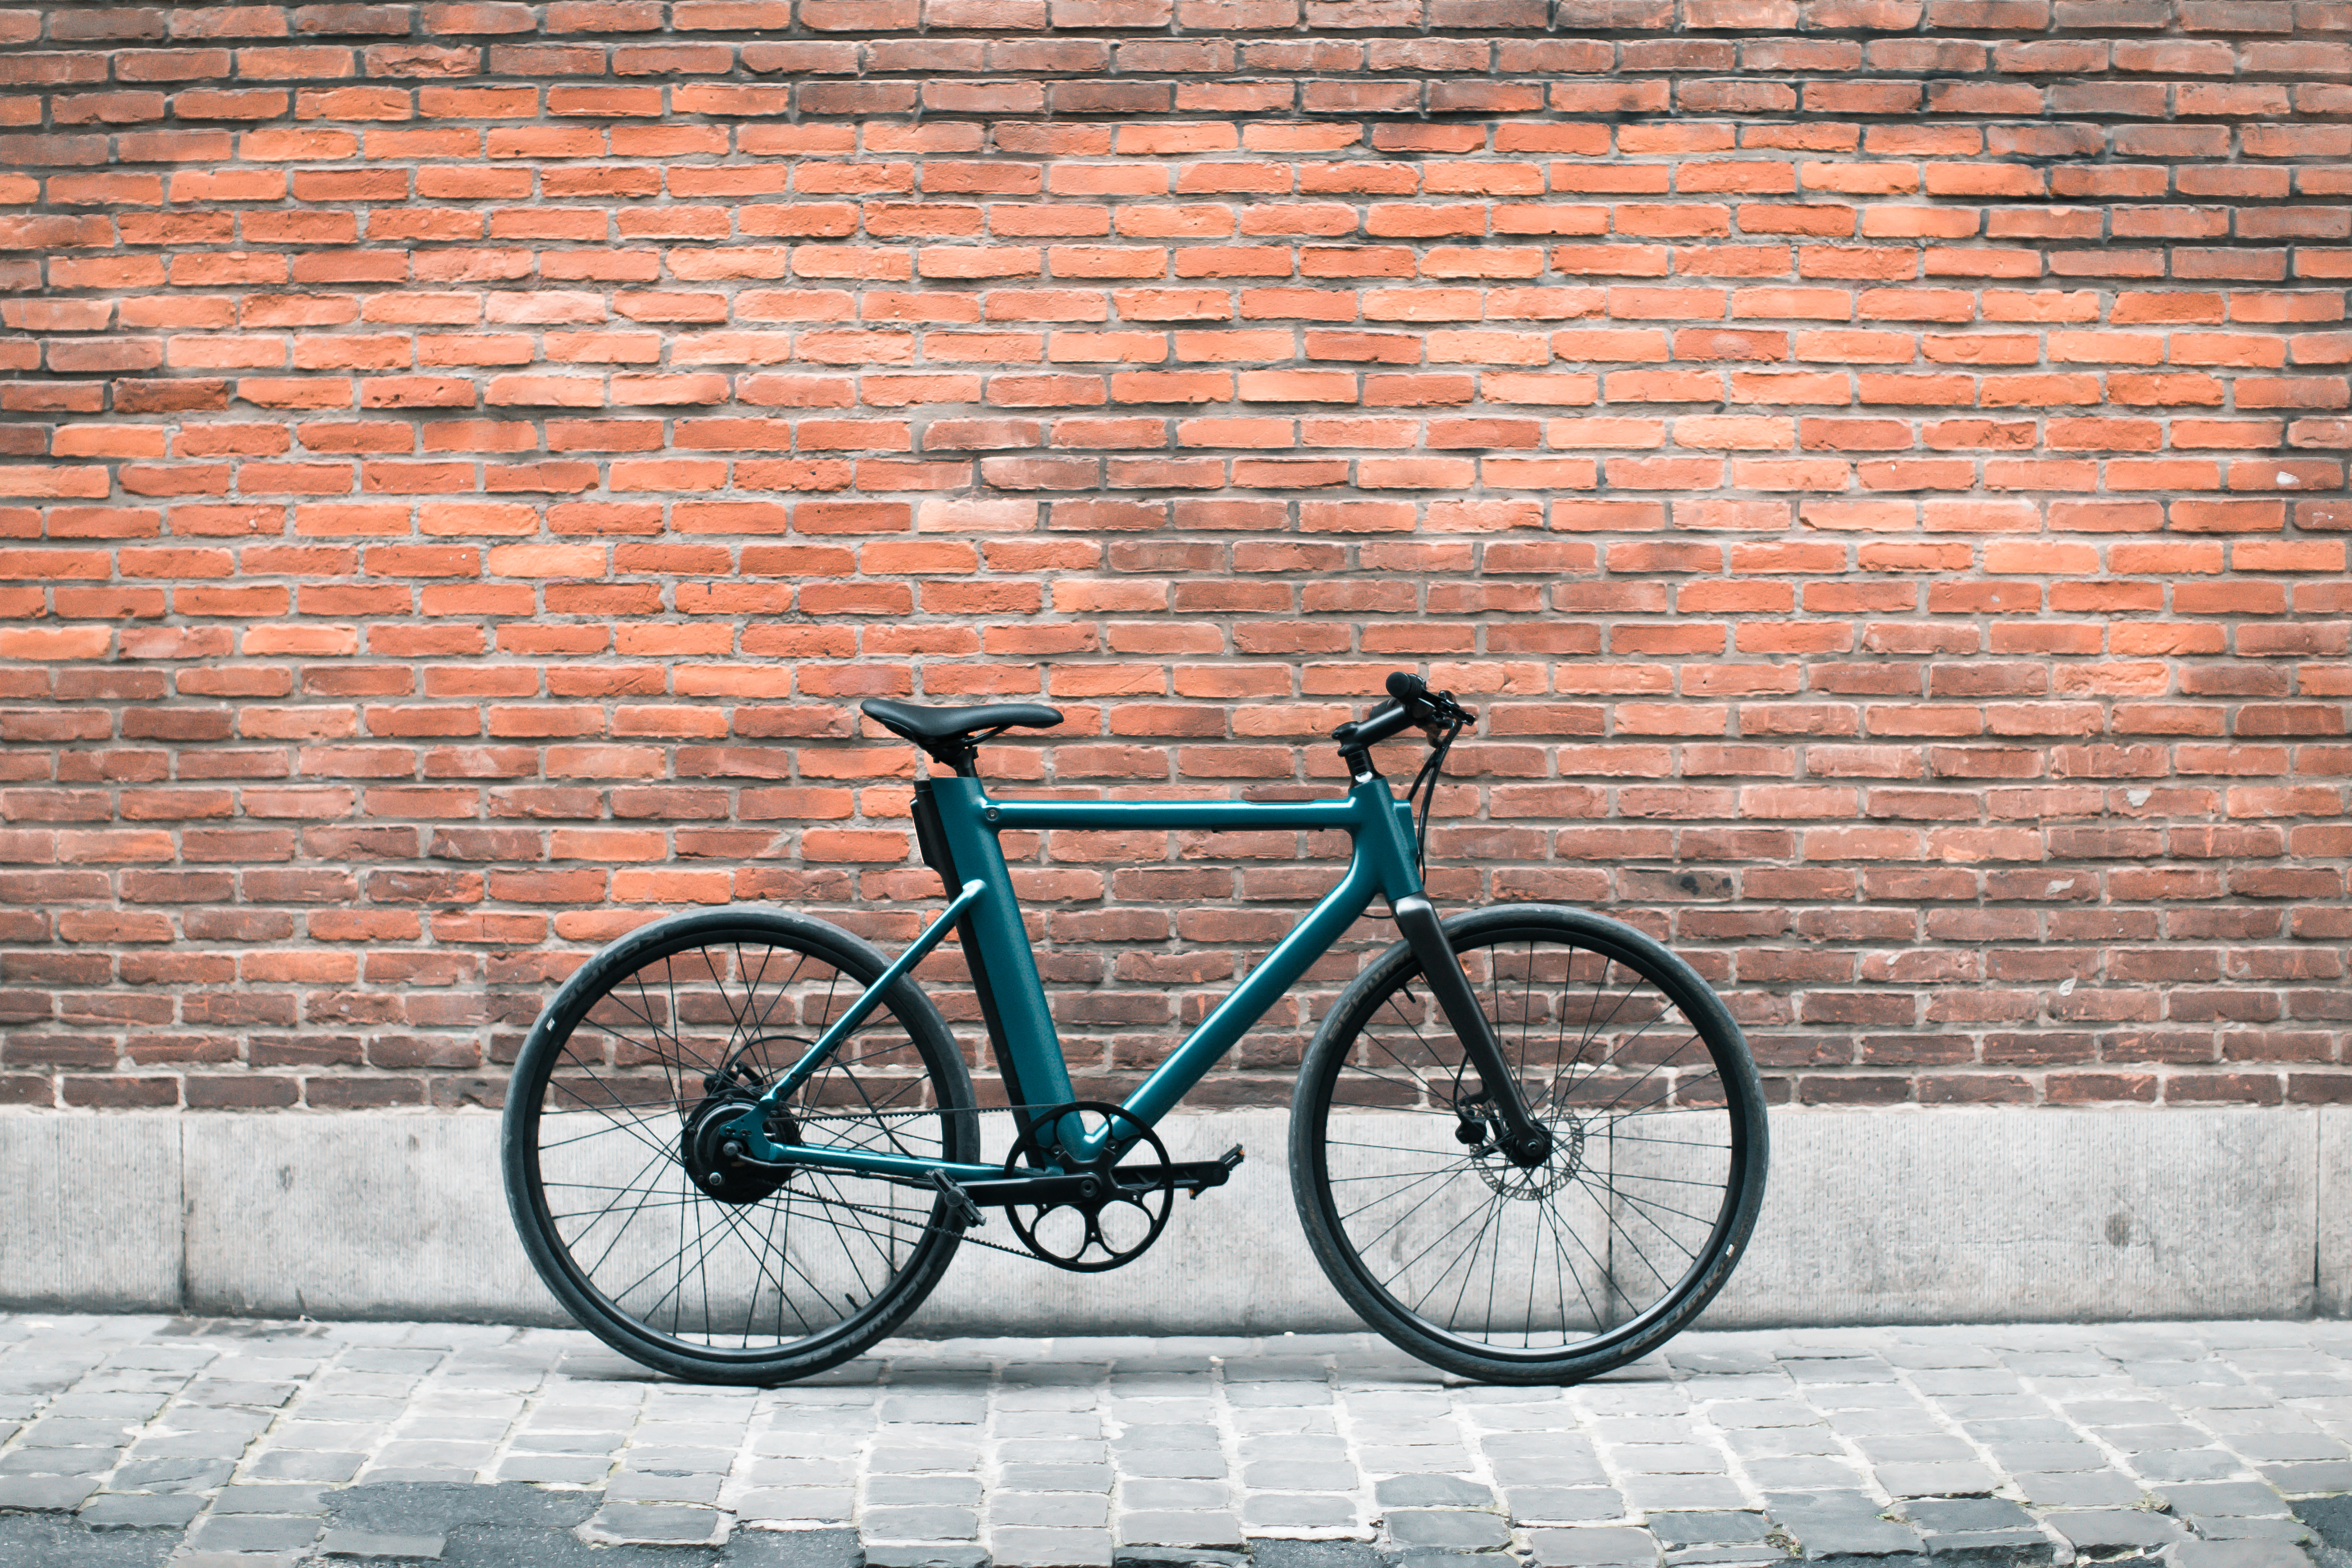 Cowboy is a new e-bike startup from 